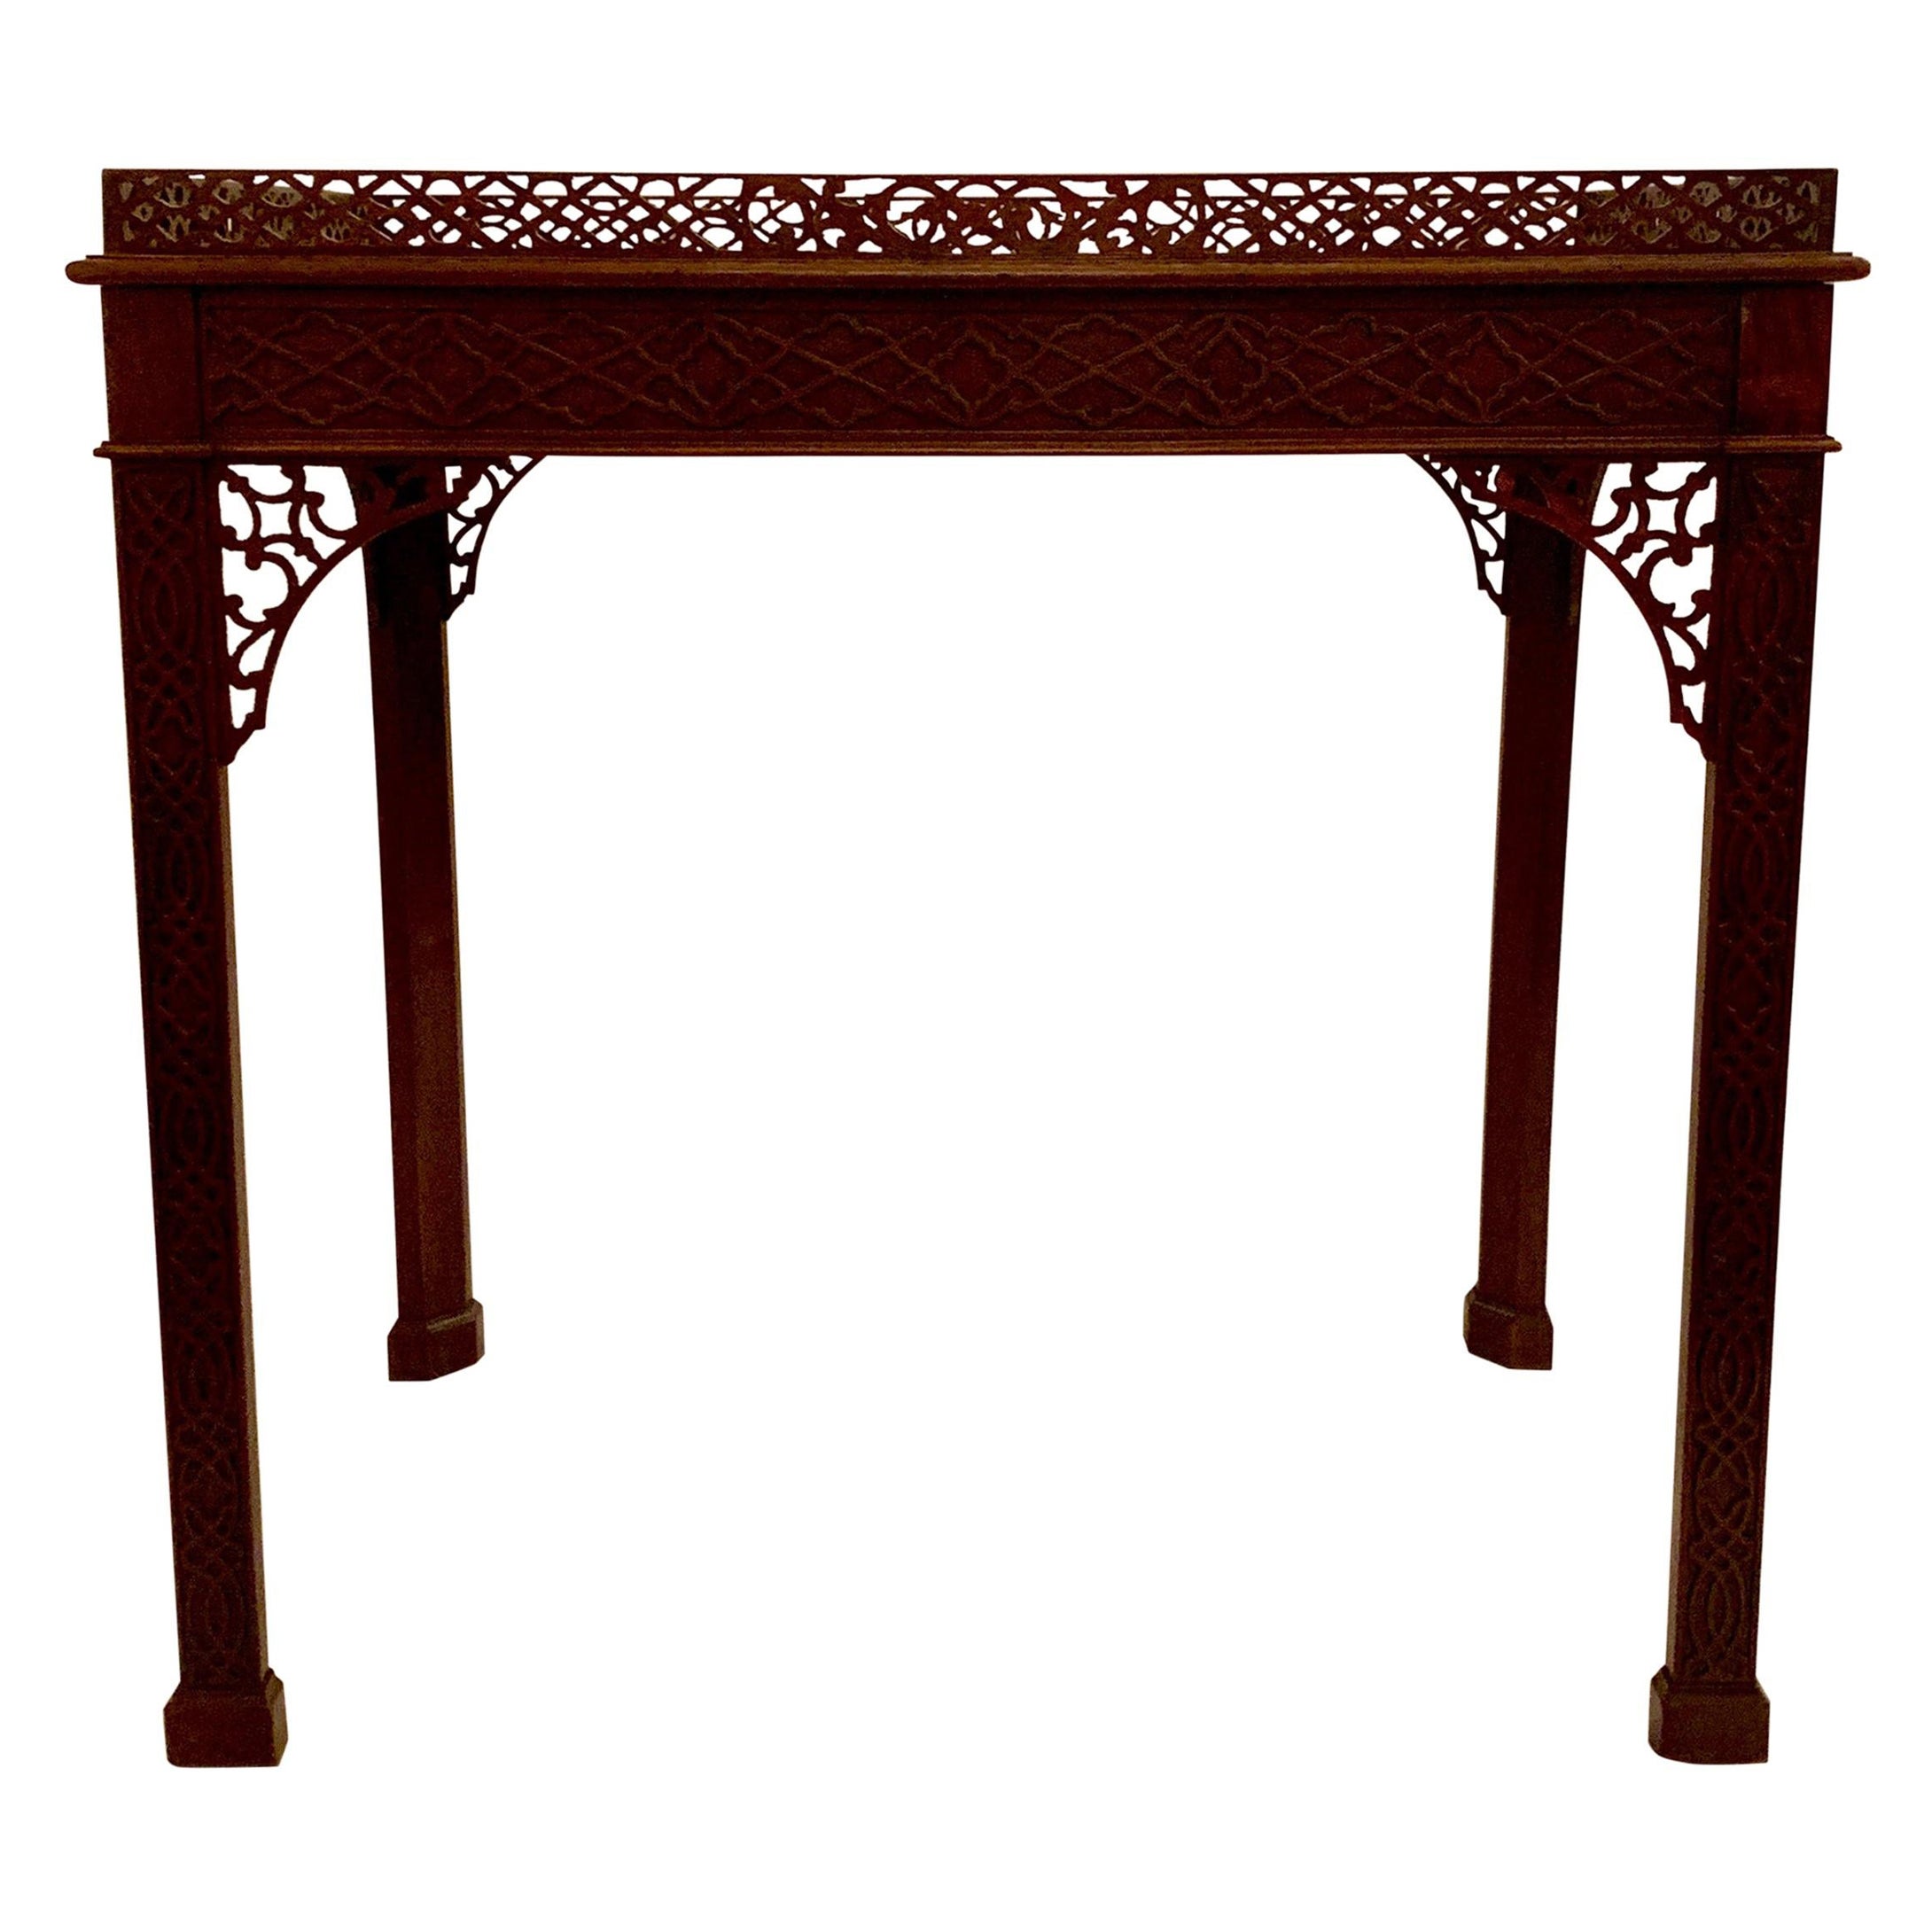 Antique English Mahogany Chippendale Fretwork Tea Table For Sale